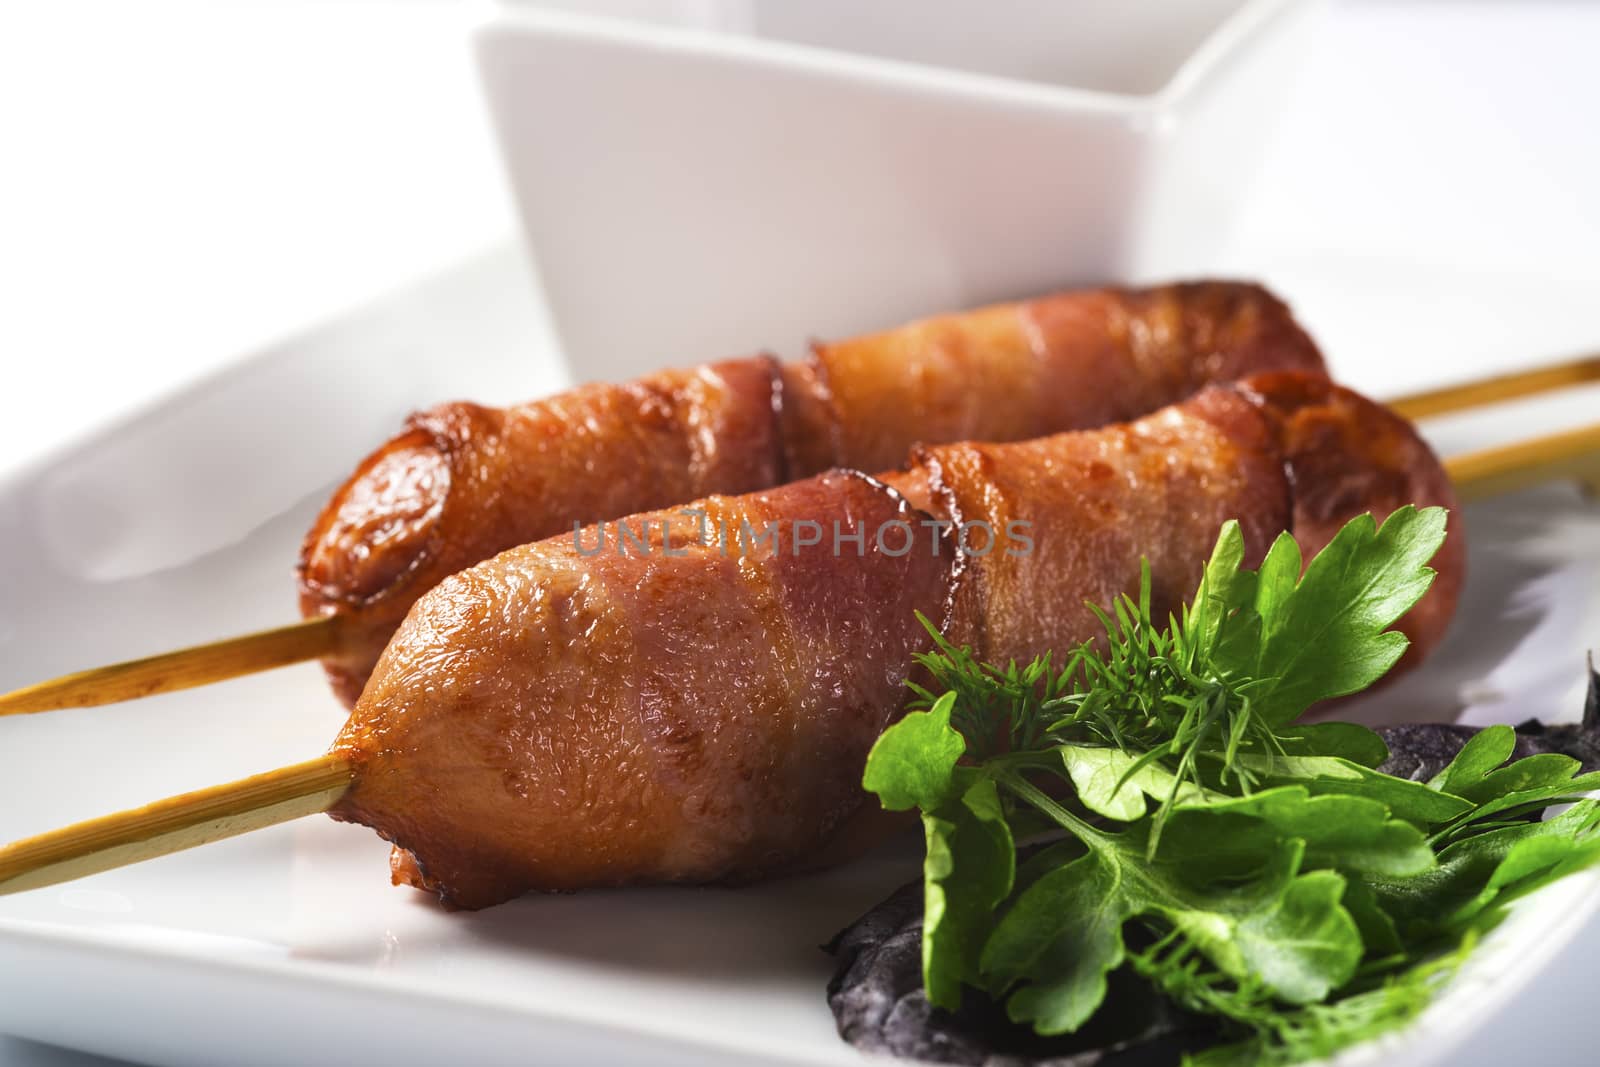 Fried sausages rolled in bacon by kzen